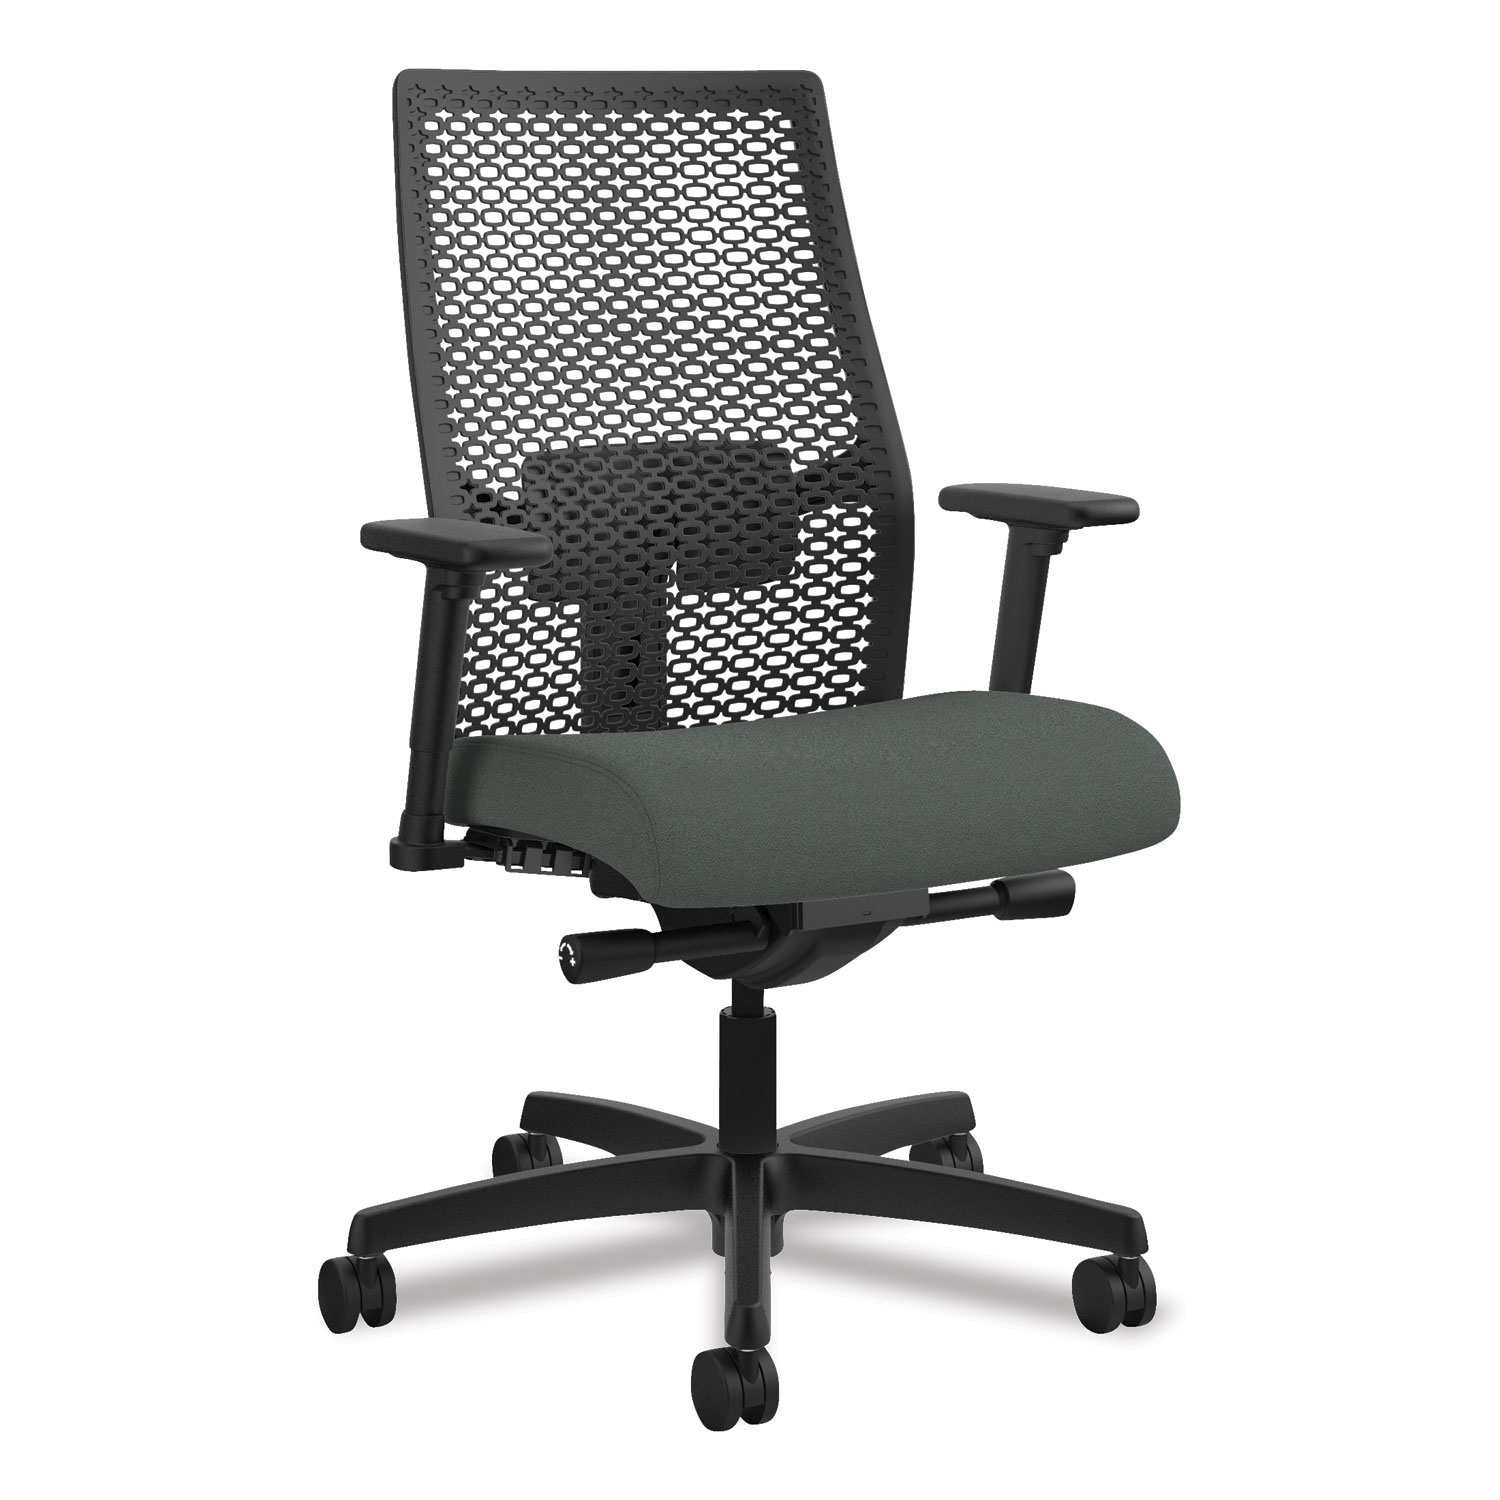  HON HONI2MRL2AC19TK Ignition 2.0 Reactiv Mid-Back Task Chair, Supports up to 300 lbs., Iron Ore Seat, Black Back, Black Base (HONI2MRL2AC19TK) 